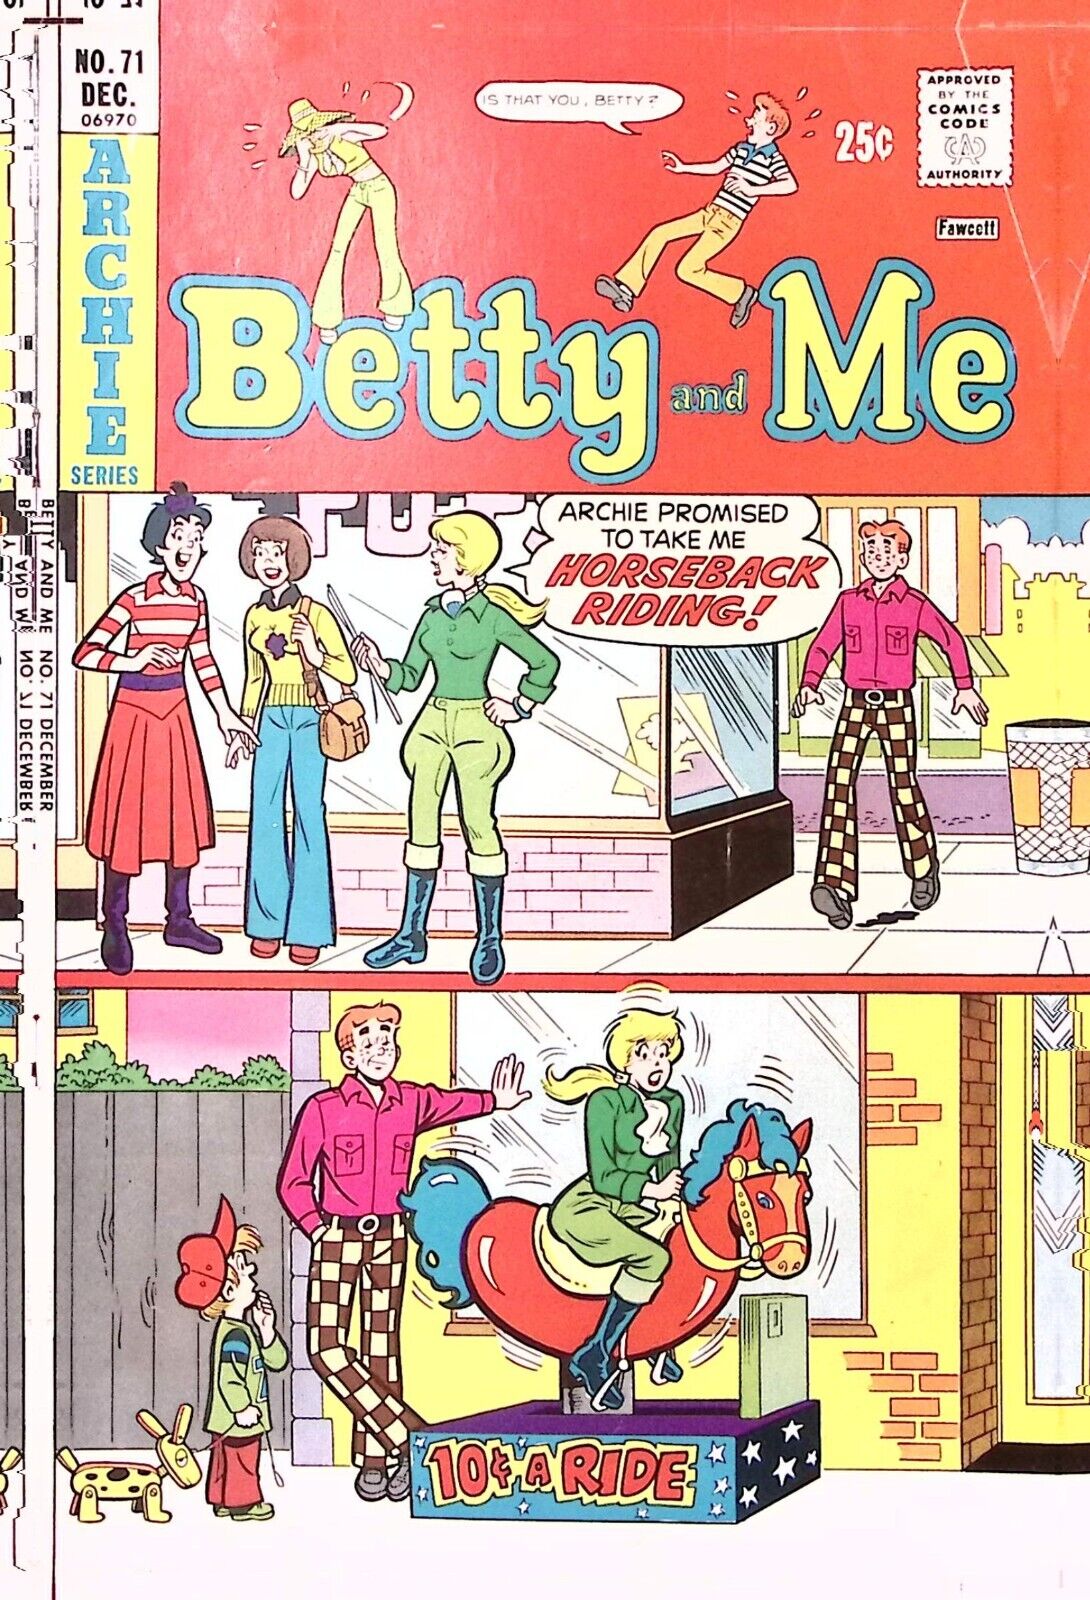 1975 ARCHIE SERIES BETTY AND ME #71 DEC DON\'T CALL US JINX IT\'S A DRAW  Z2384